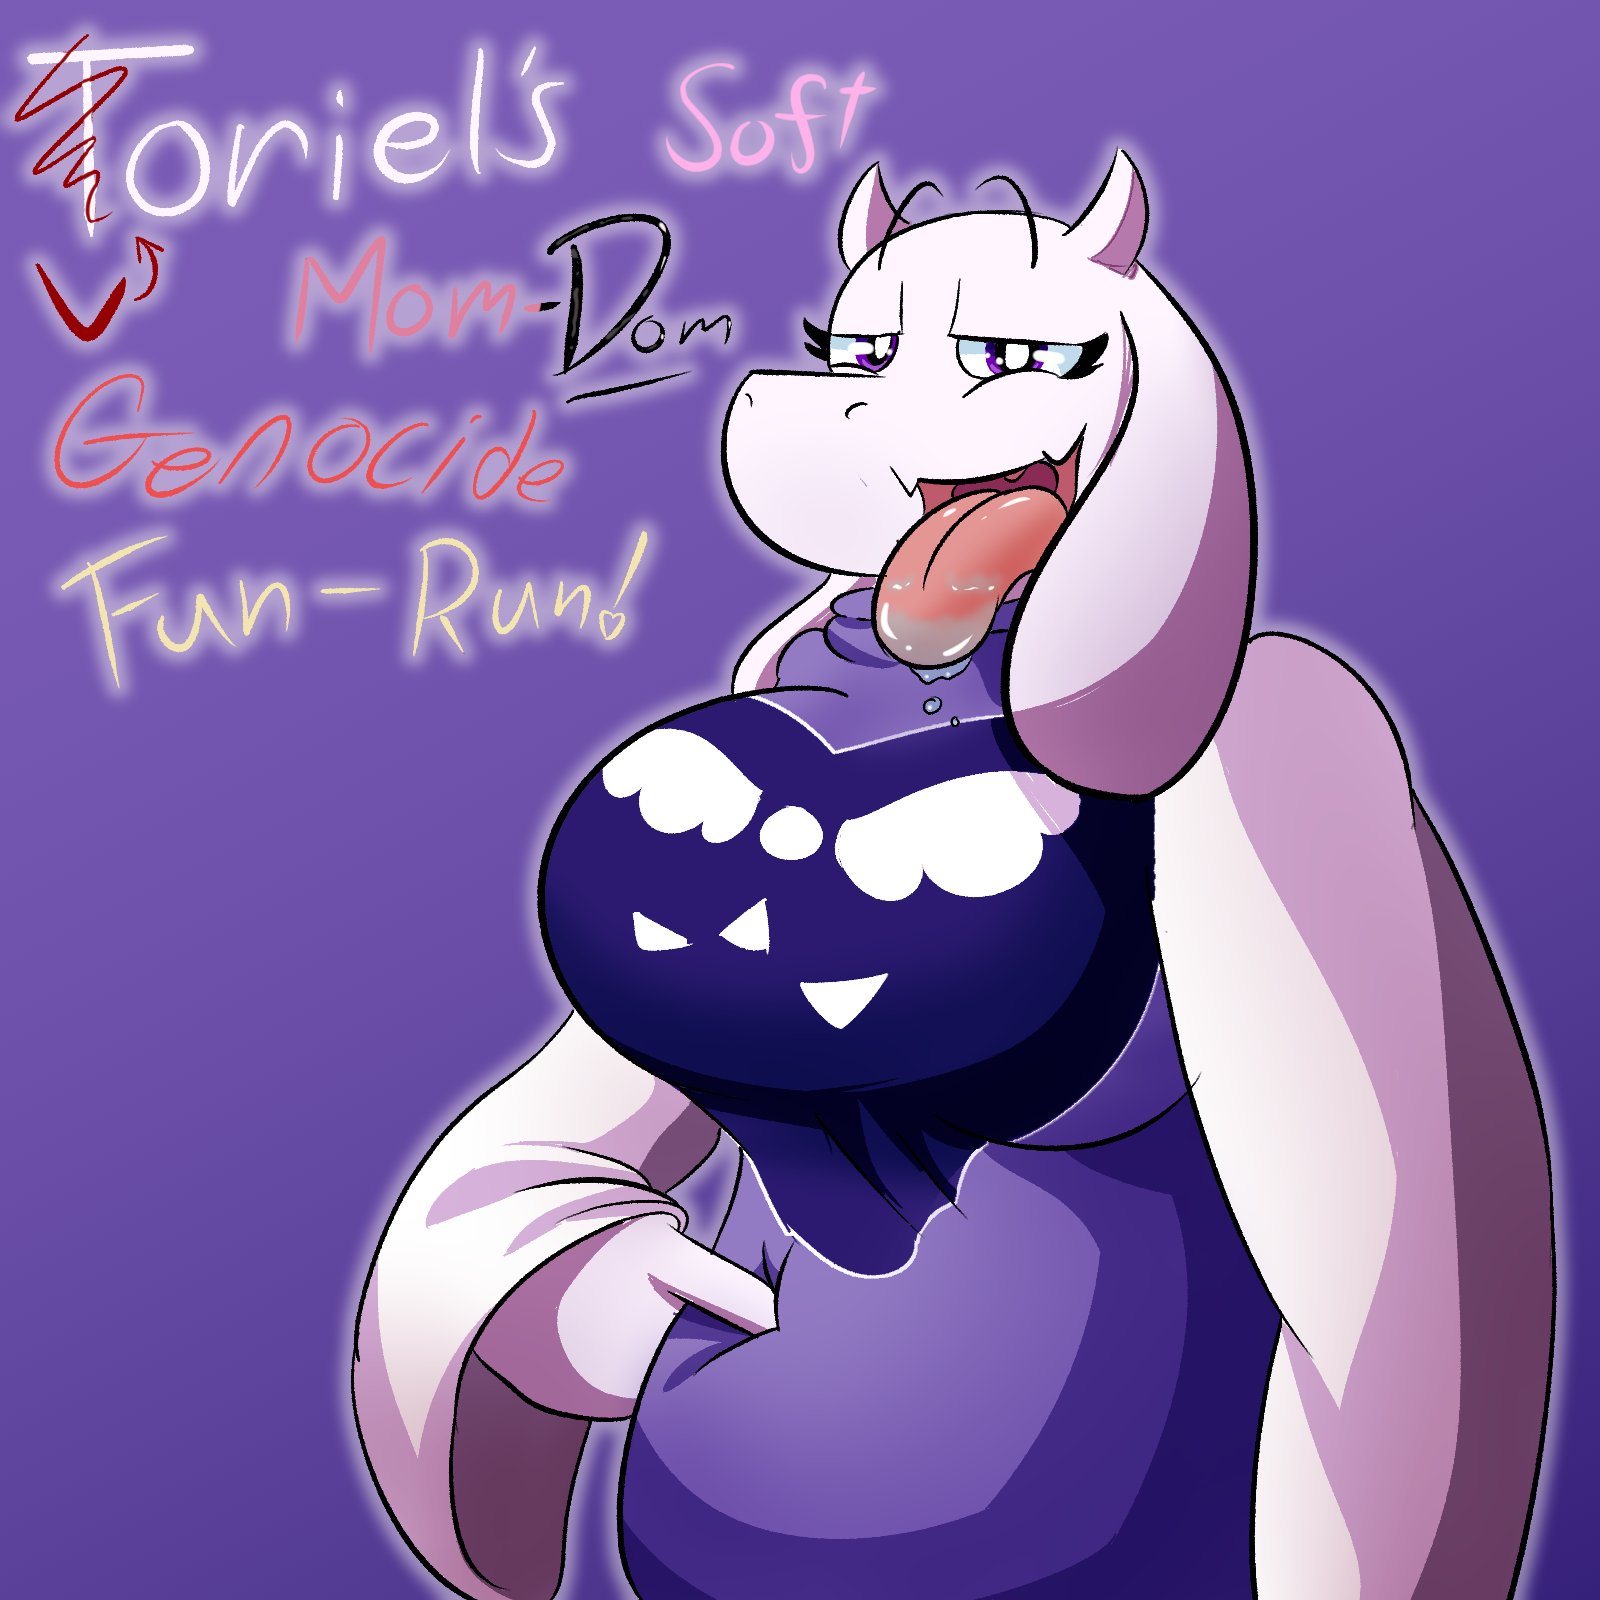 “I gave my Toriel sequence a silly long name!

